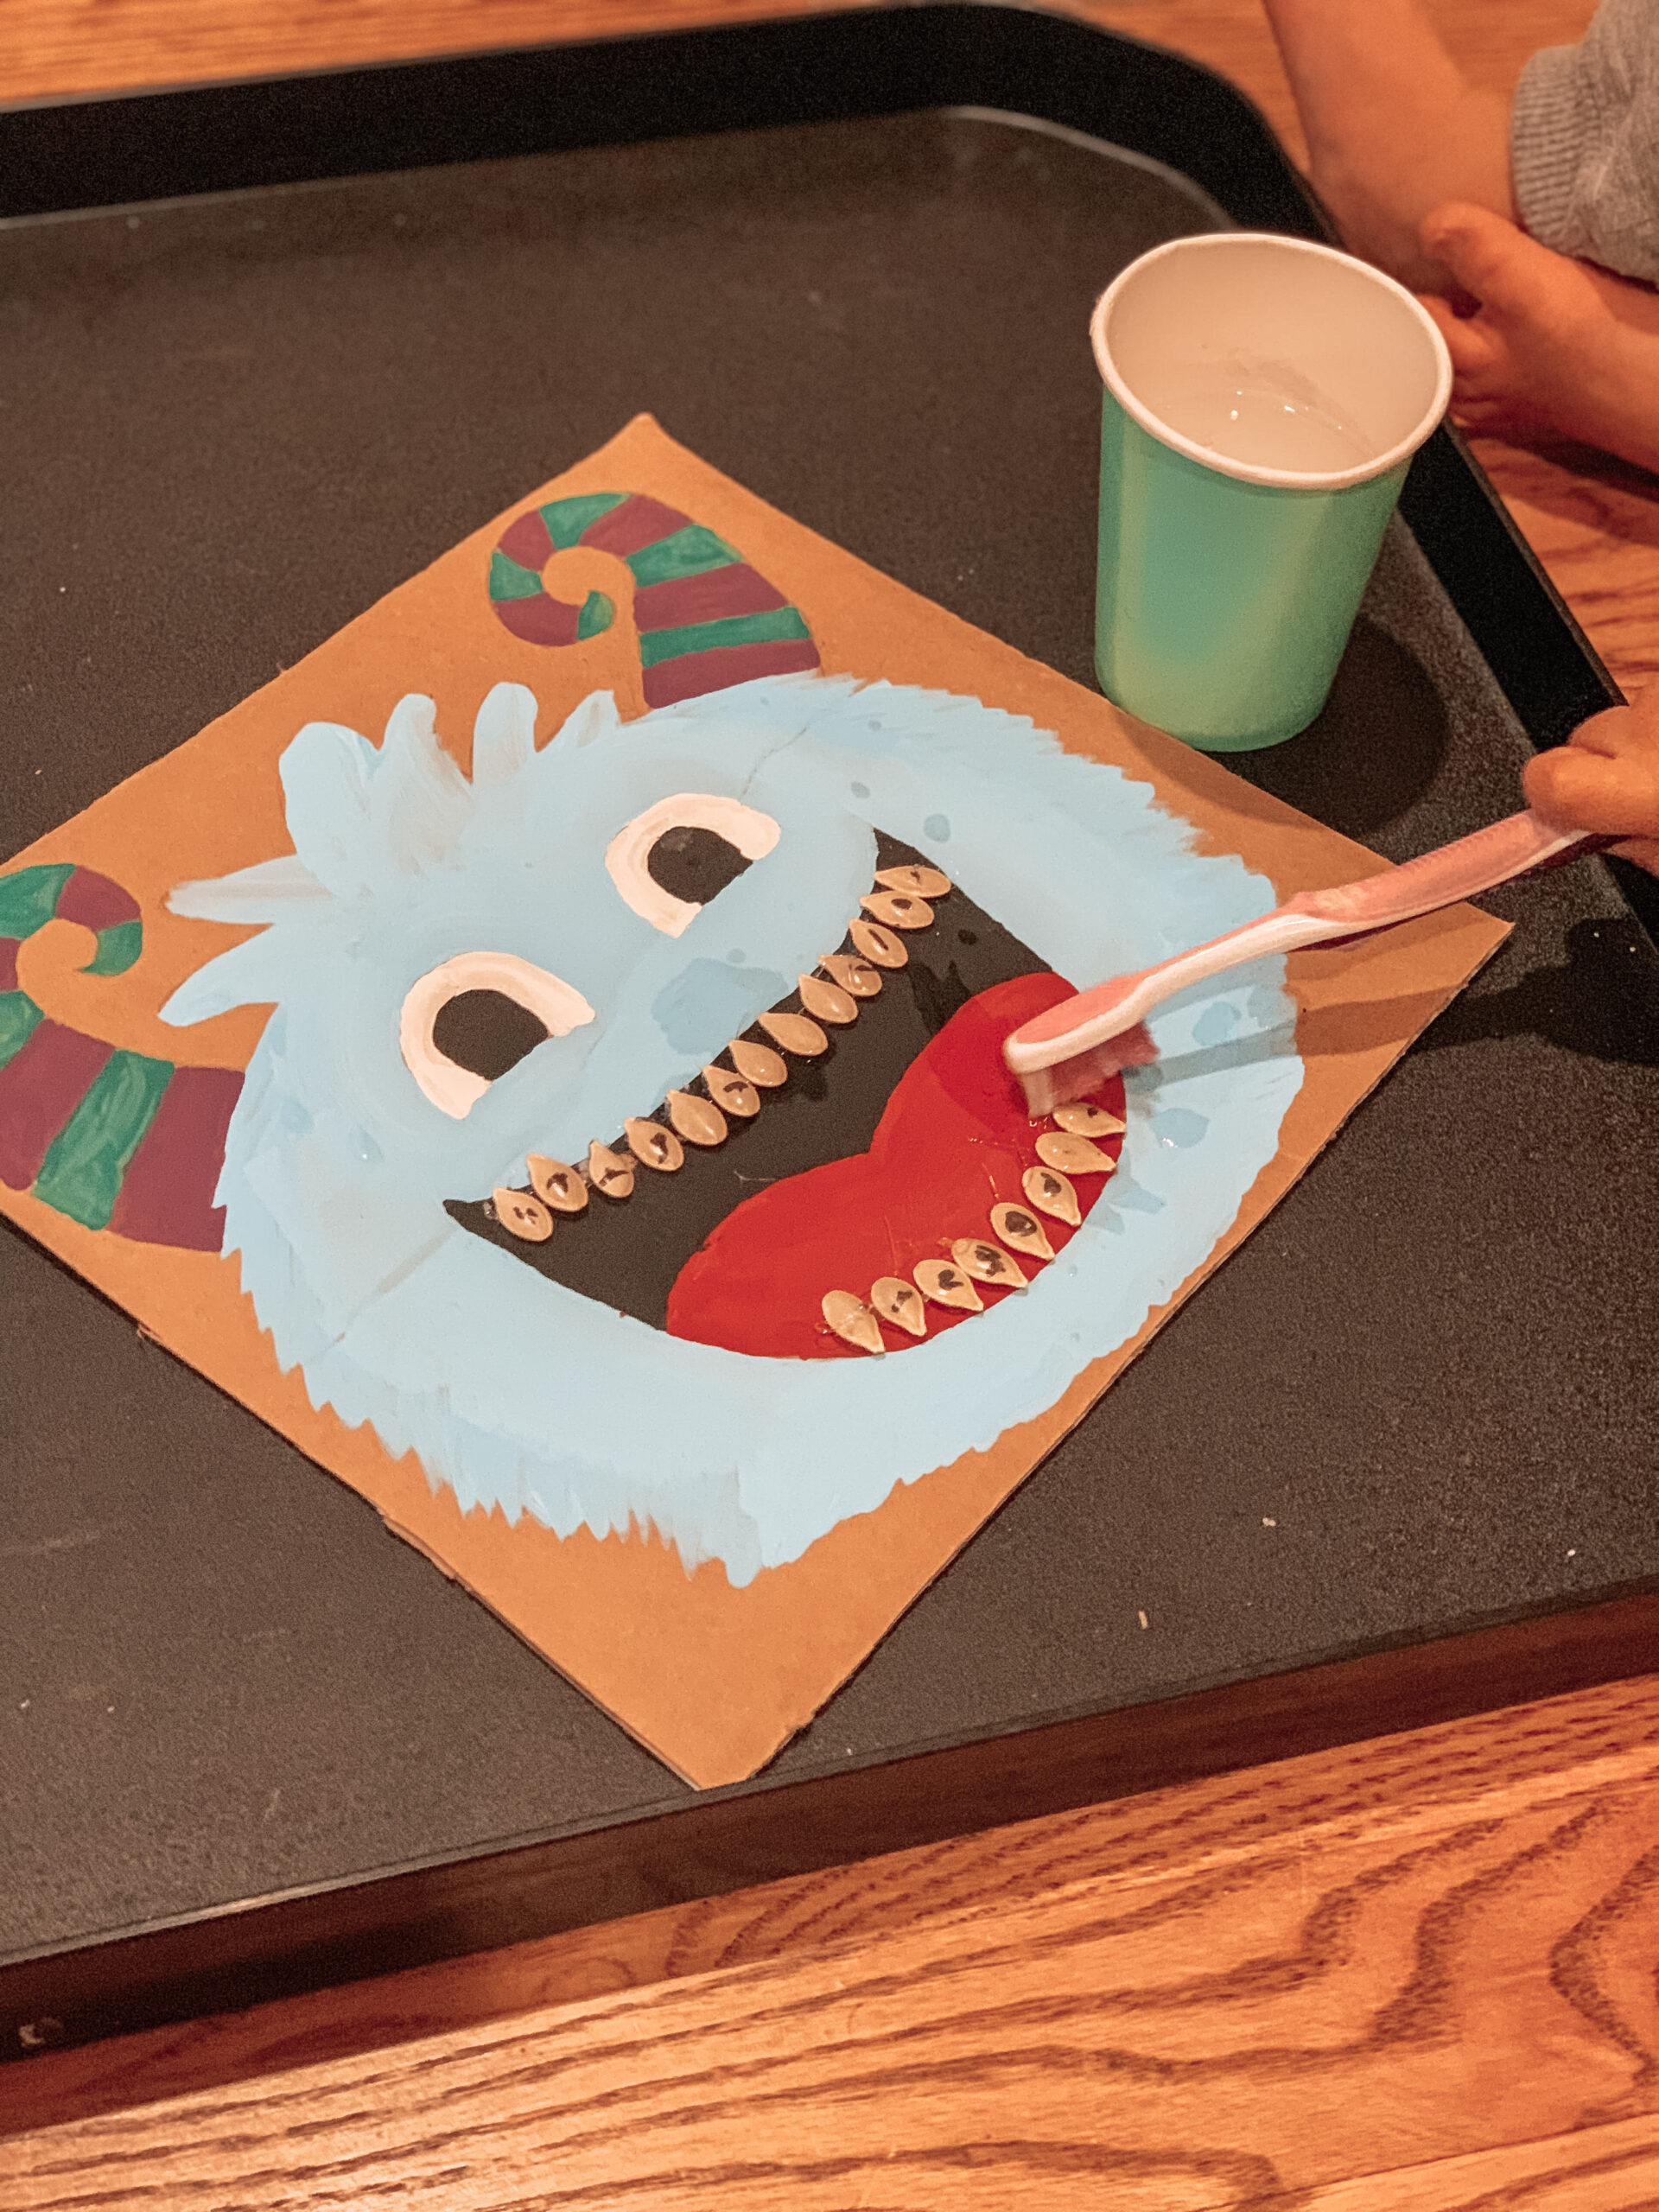 Kid playing with the completed repurposed monster craft. Using a toothbrush on the monster's teeth